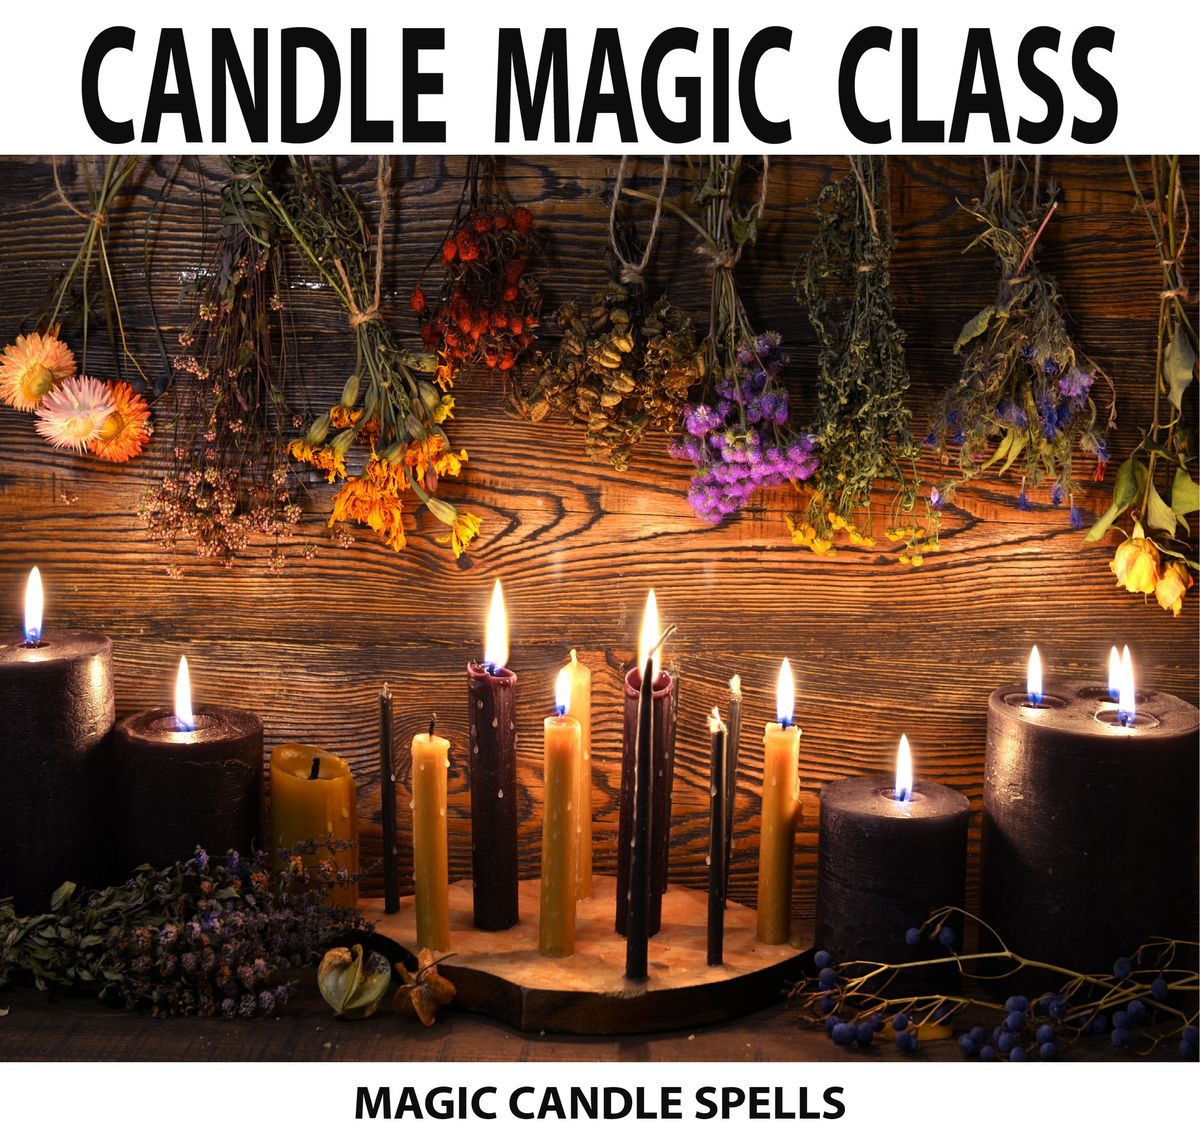 Candle Magic Class #3 - Writing Candle Spells - $5.00  